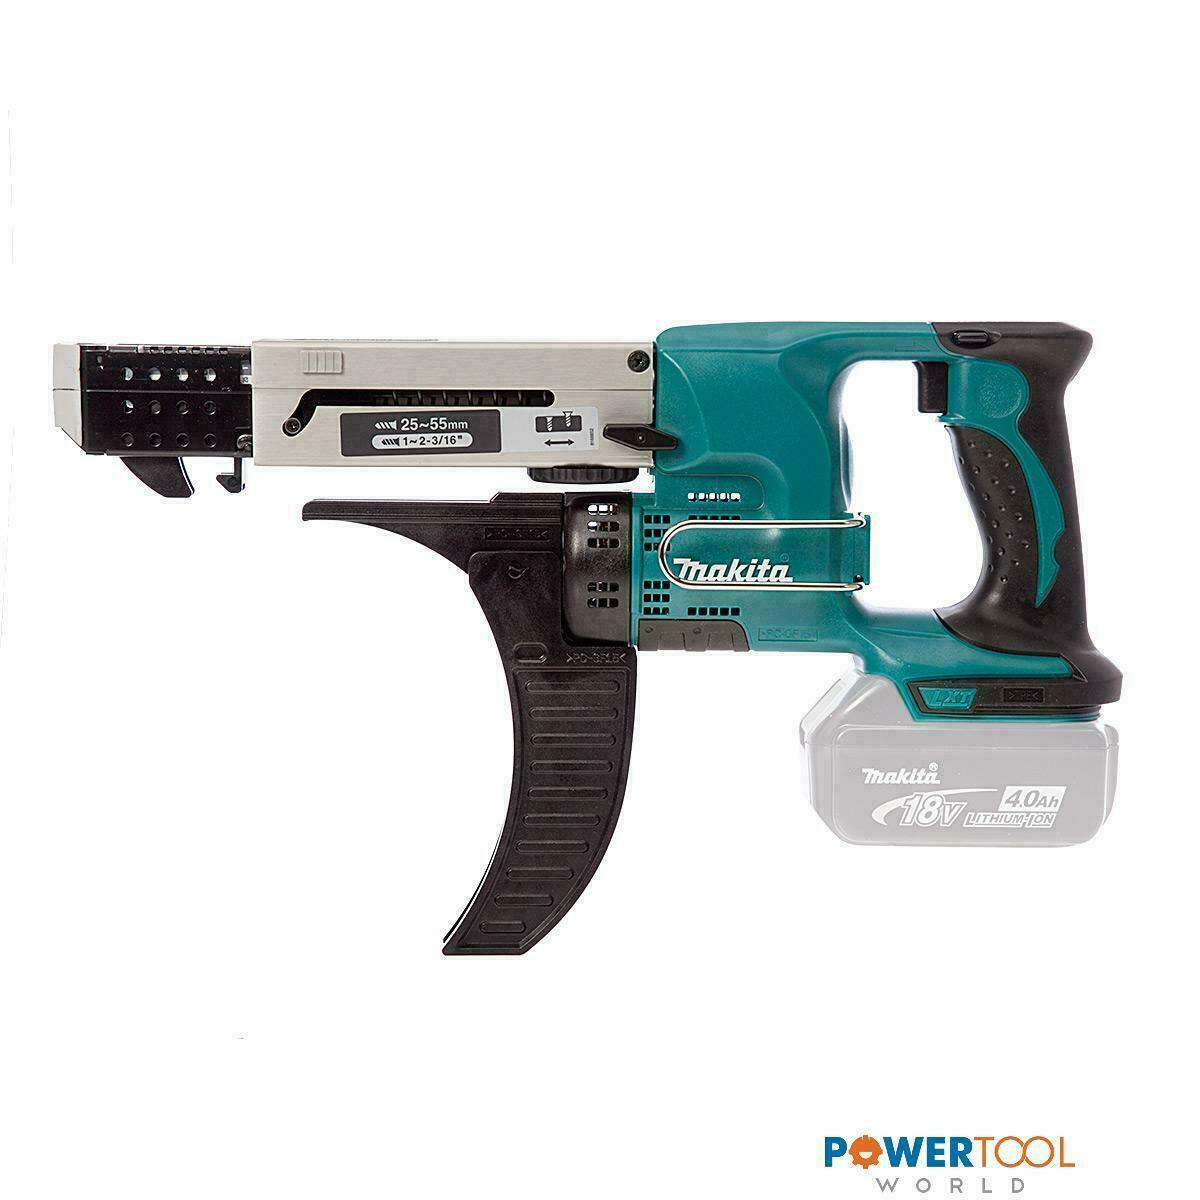 Makita DFR550Z LXT 18v Cordless Auto Feed Screwdriver Body Only